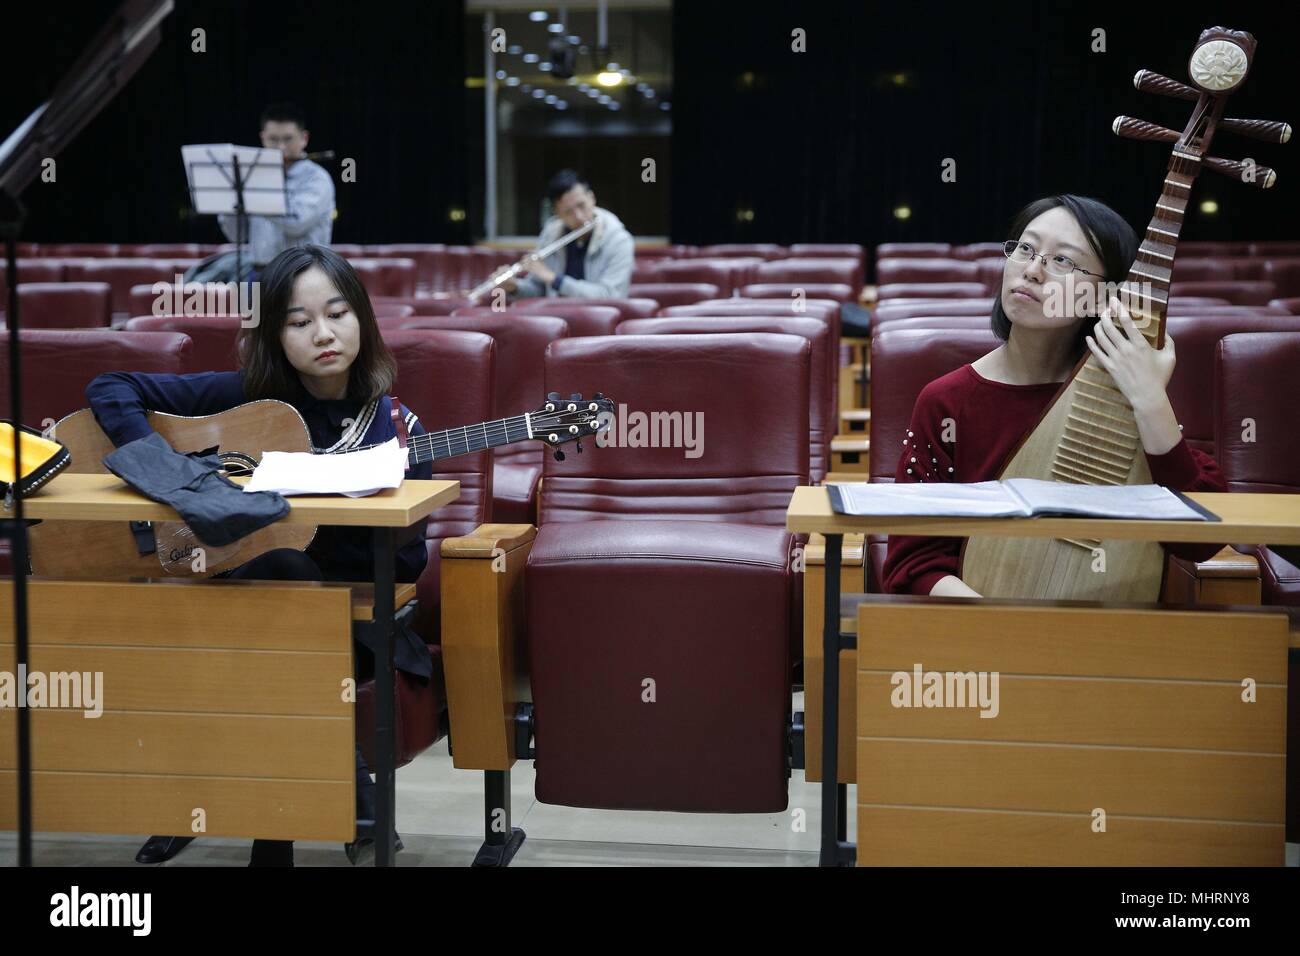 (180503) -- BEIJING, May 3, 2018 (Xinhua) -  Members of the 'Xieyun'orchestra attend a rehearsal at Peking Union Medical College (PUMC) in Beijing, capital of China, April 13, 2018. In 2015, Peking Union Medical College Hospital doctors and PUMC students launched the 'Xieyun' orchestra. Every month, members of 'Xieyun' would voluntarily stage one or two musical performances for patients, their families, and other medical workers. The orchestra was widely appreciated by its audiences for its performances and the members' concern and love for the patients. (Xinhua/Zhang Yuwei) (lb) (zt) Stock Photo